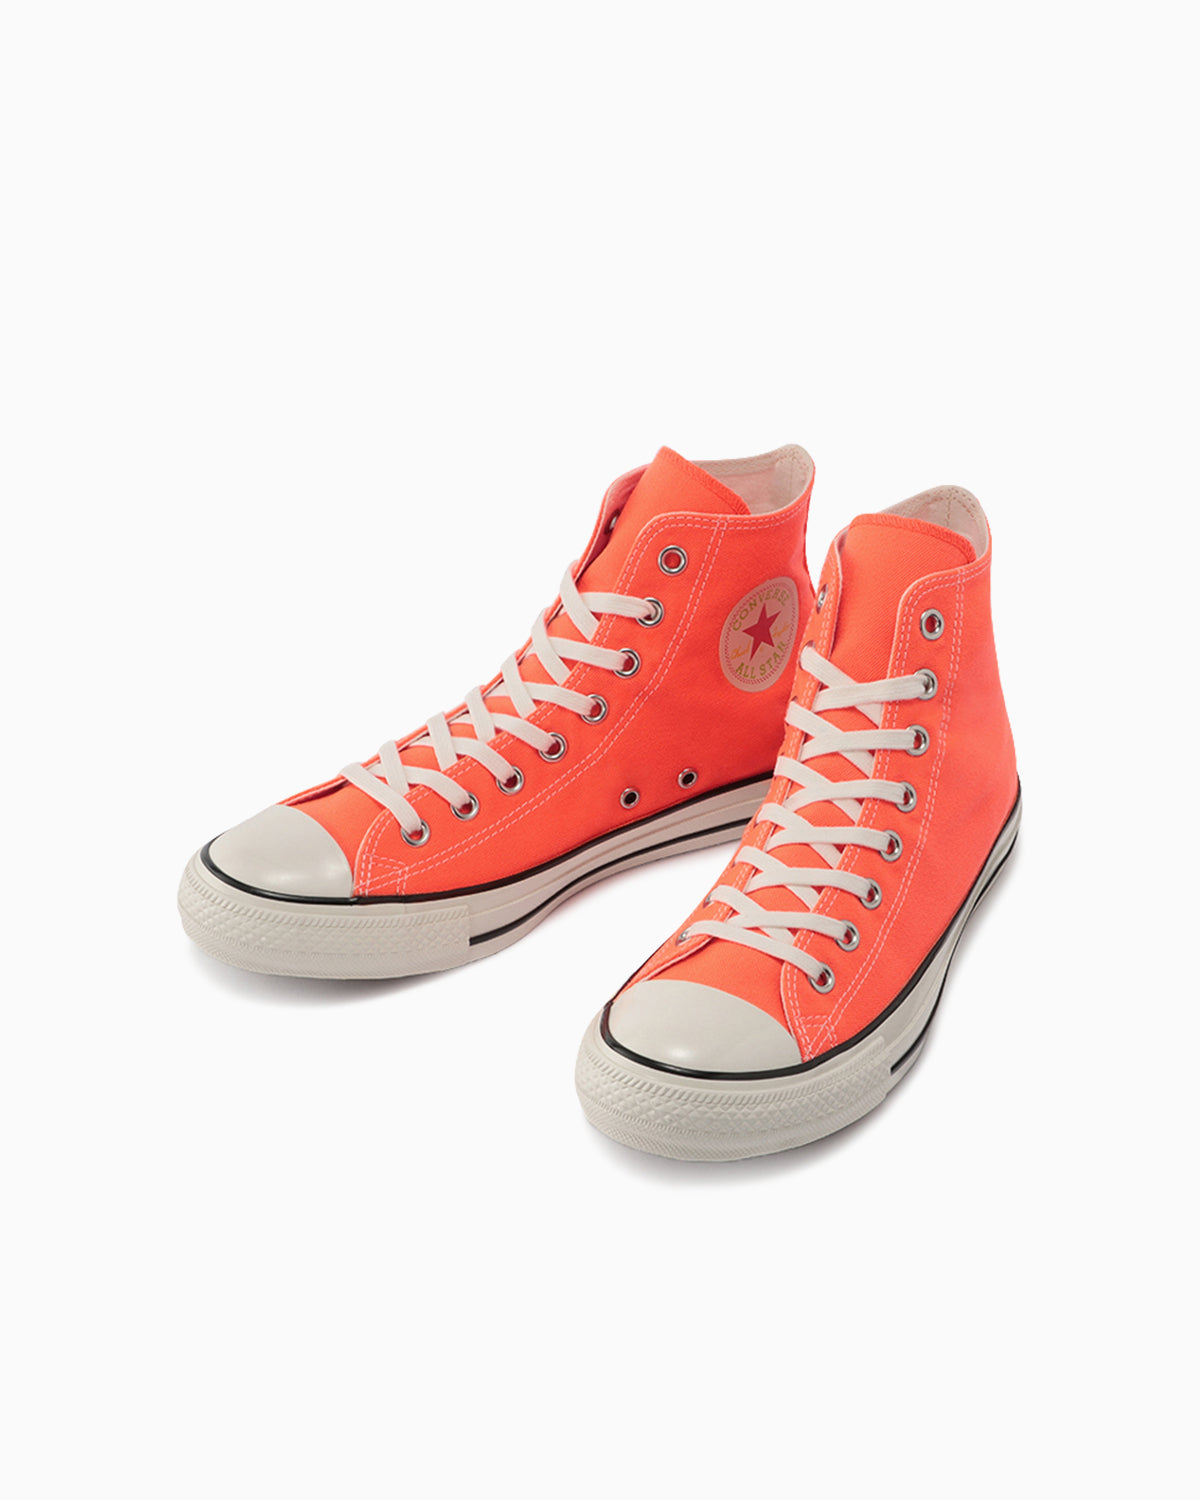 ALL STAR US NEONCOLORS OF HI